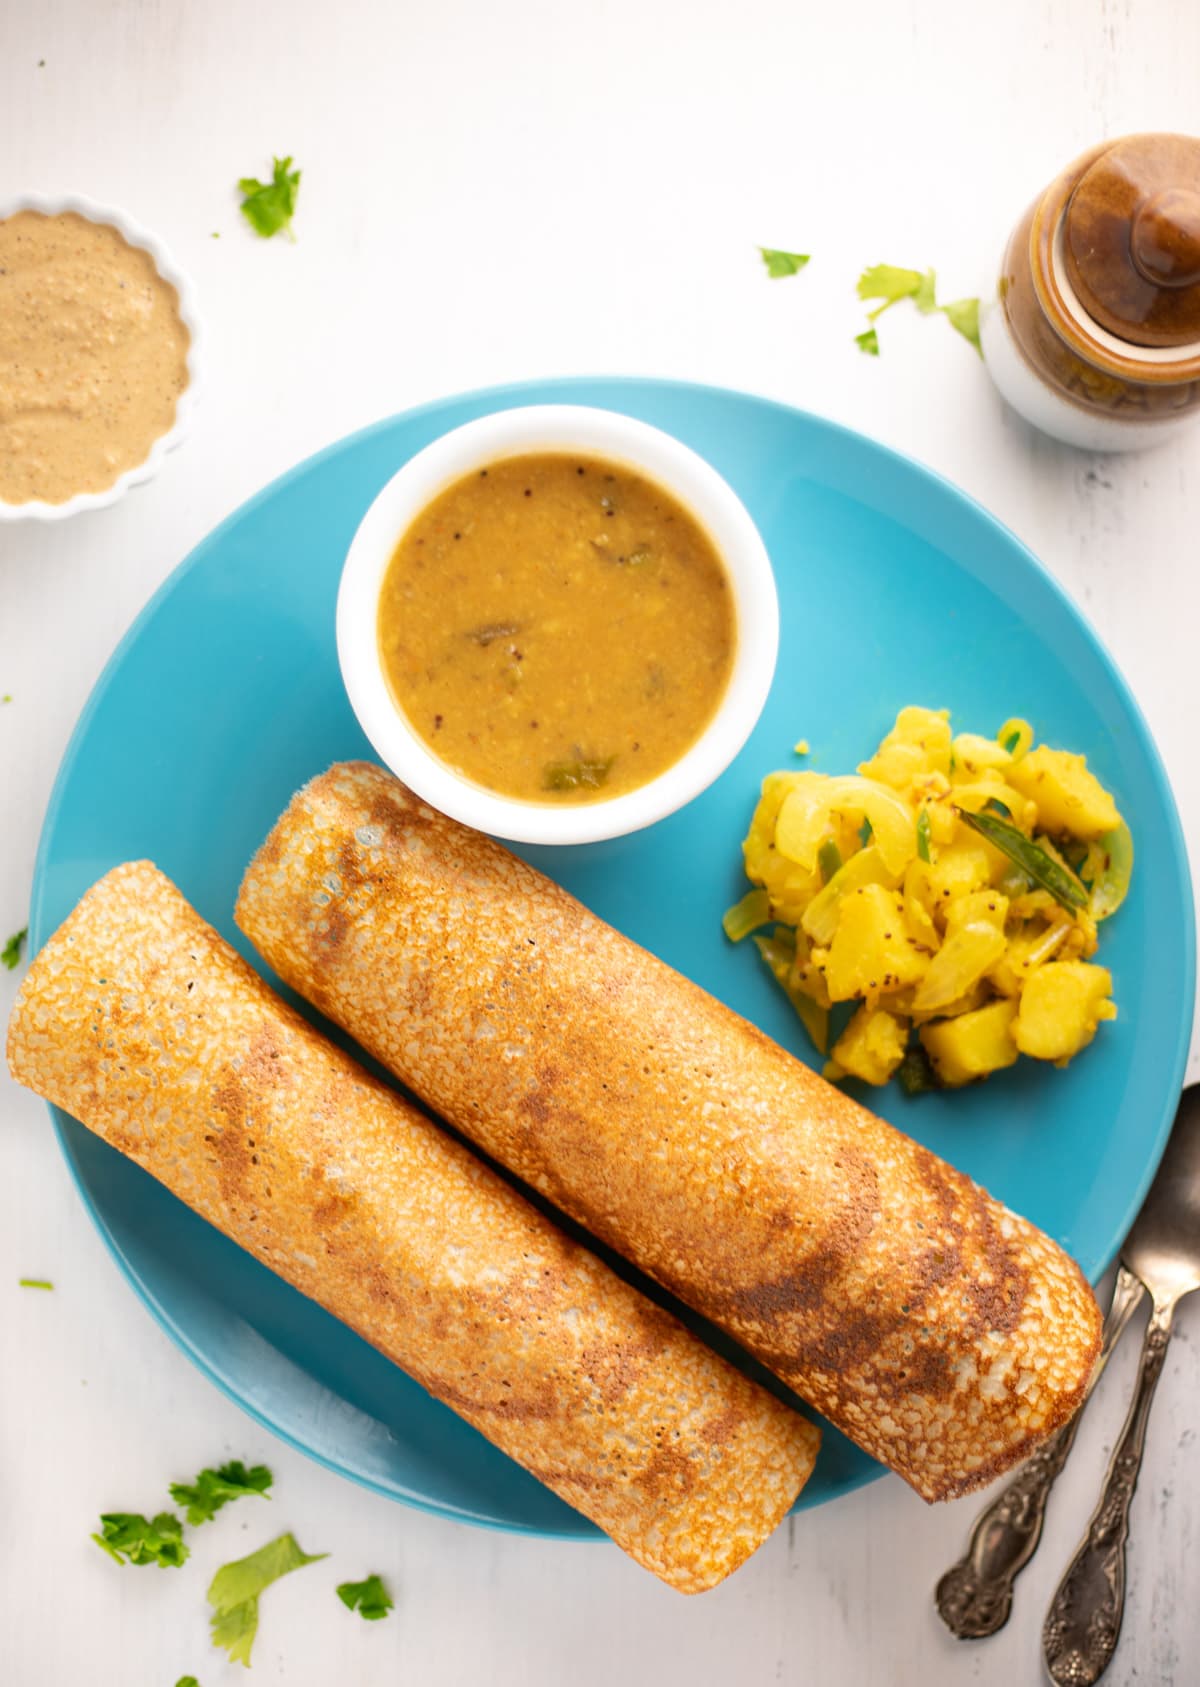 https://pipingpotcurry.com/wp-content/uploads/2021/01/Onstant-Quinoa-dosa-recipe-Piping-Pot-Curry.jpg